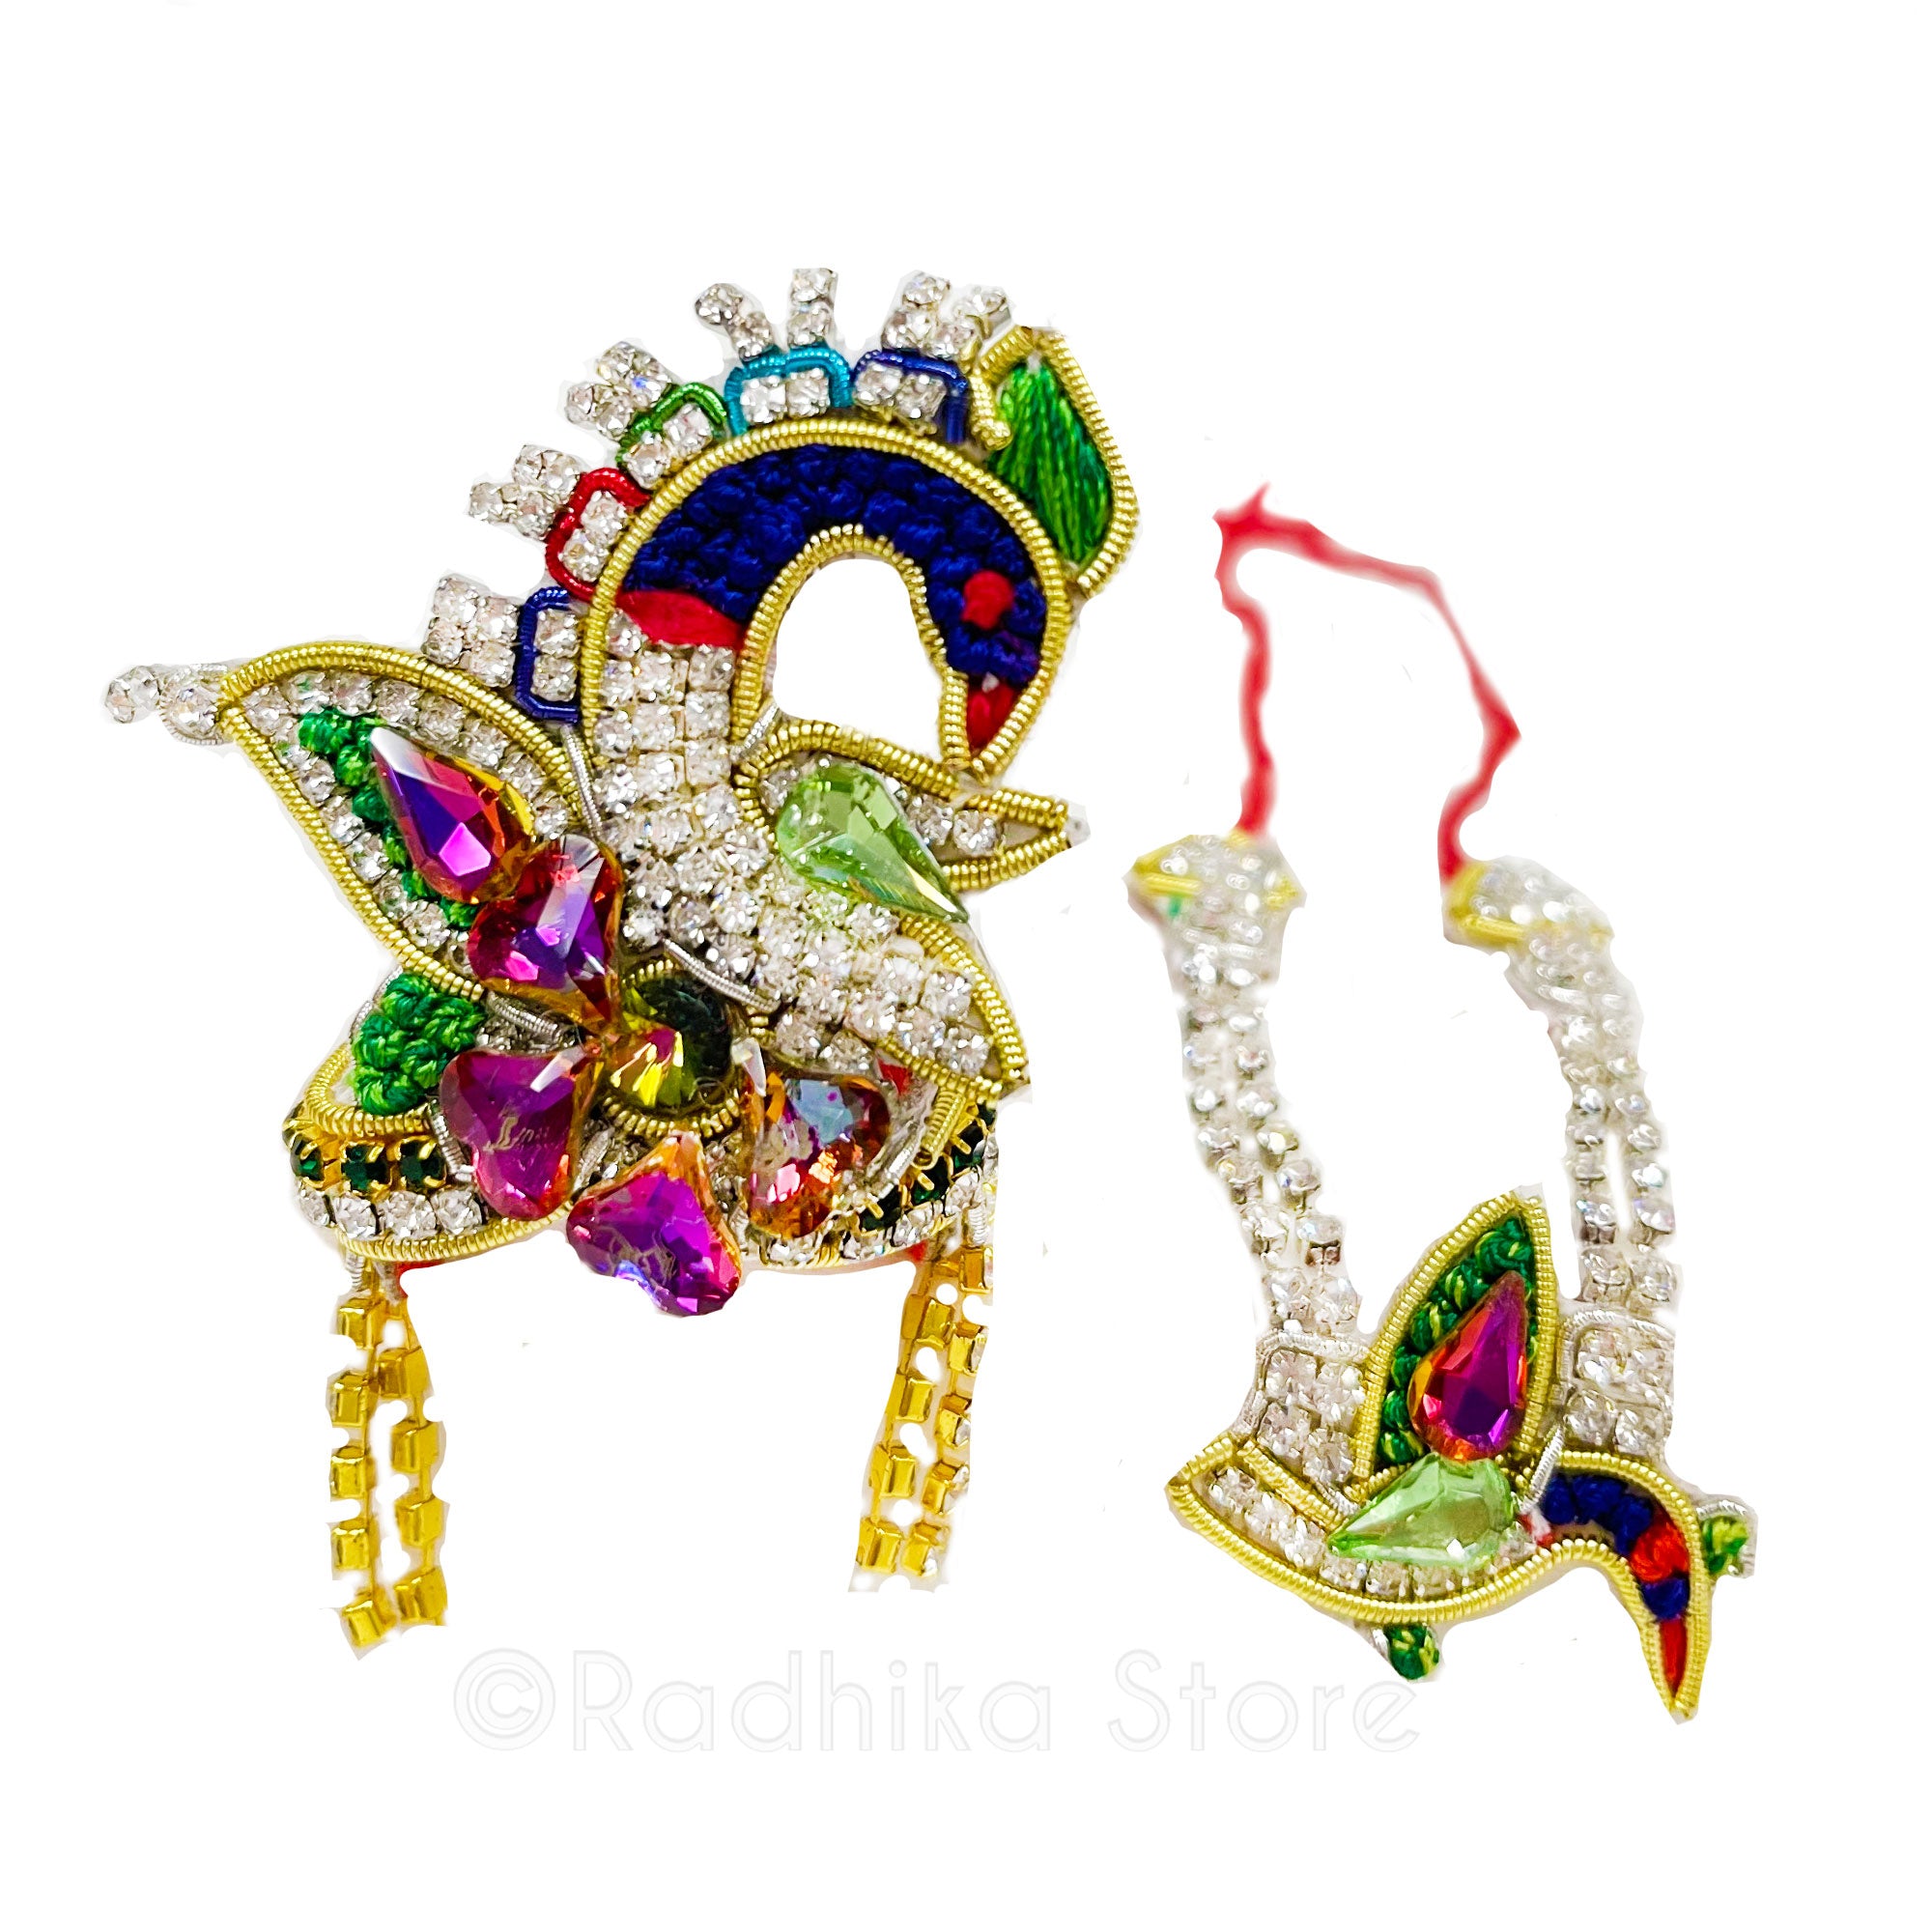 Vamsi Vat Peacock - Deity Crown and Necklace set